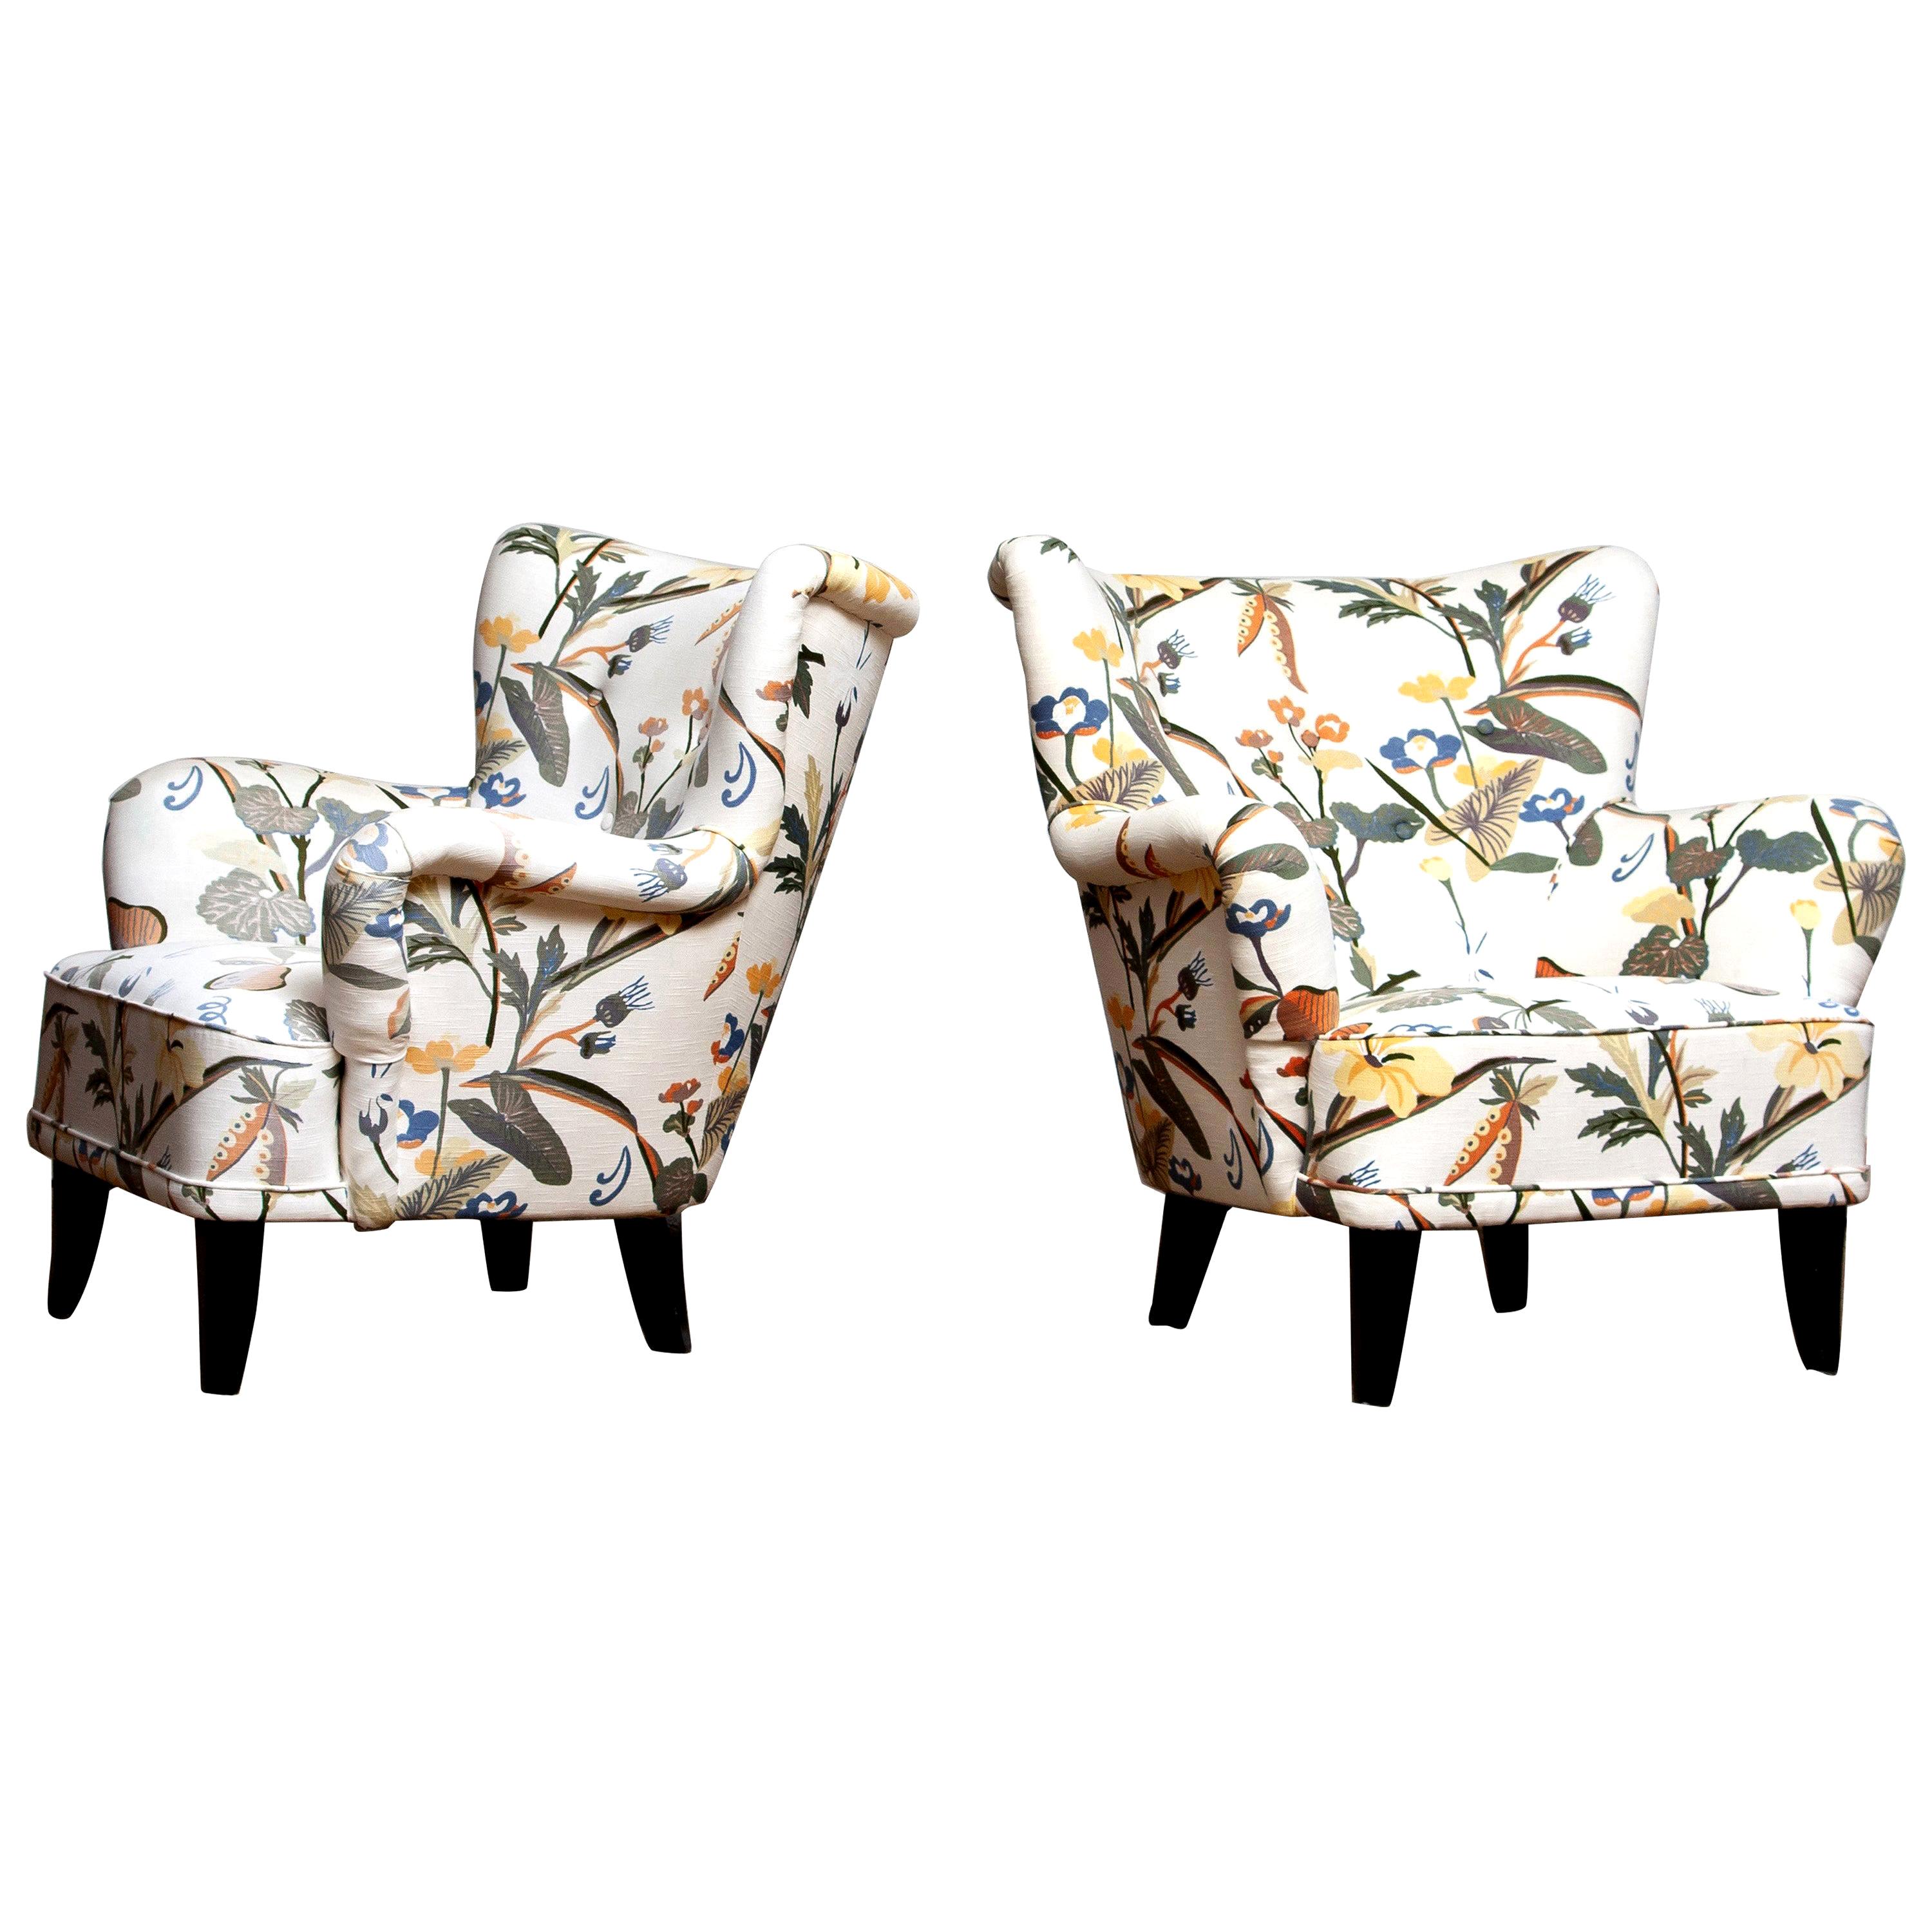 Finnish Pair of Lounge/Easy Chairs, Ilmari Lappalainen for Asko with Josef Frank Fabric